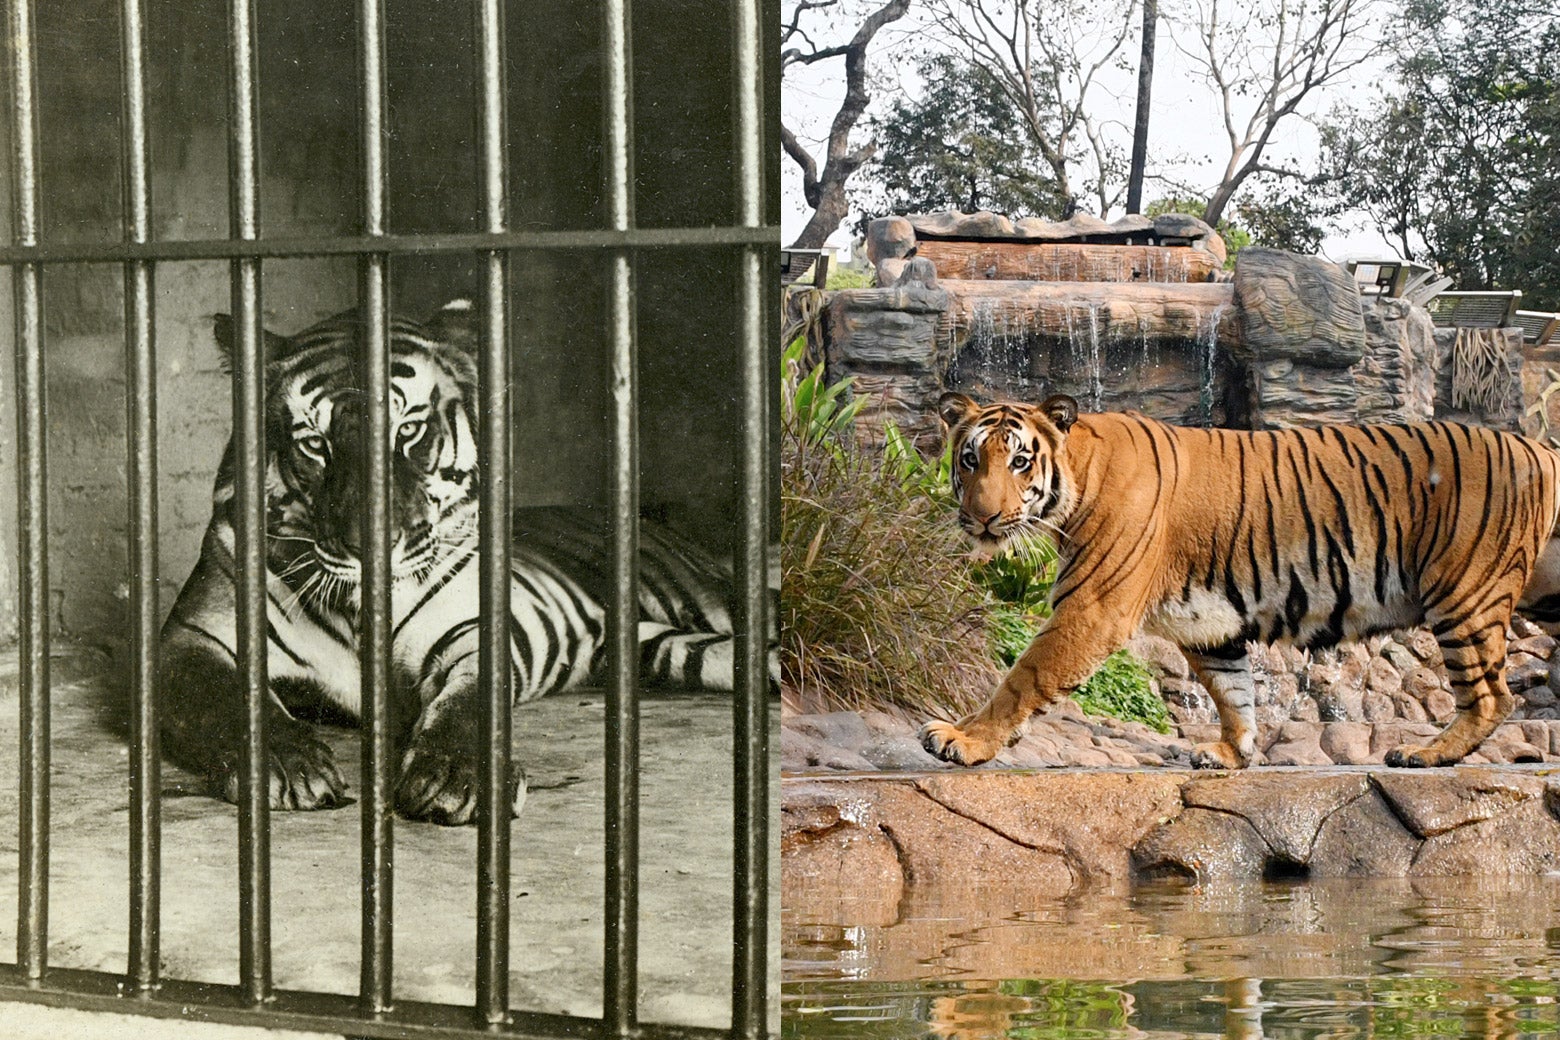 Caged tiger in 1903 and a tiger at the Byculla zoo in 2015.